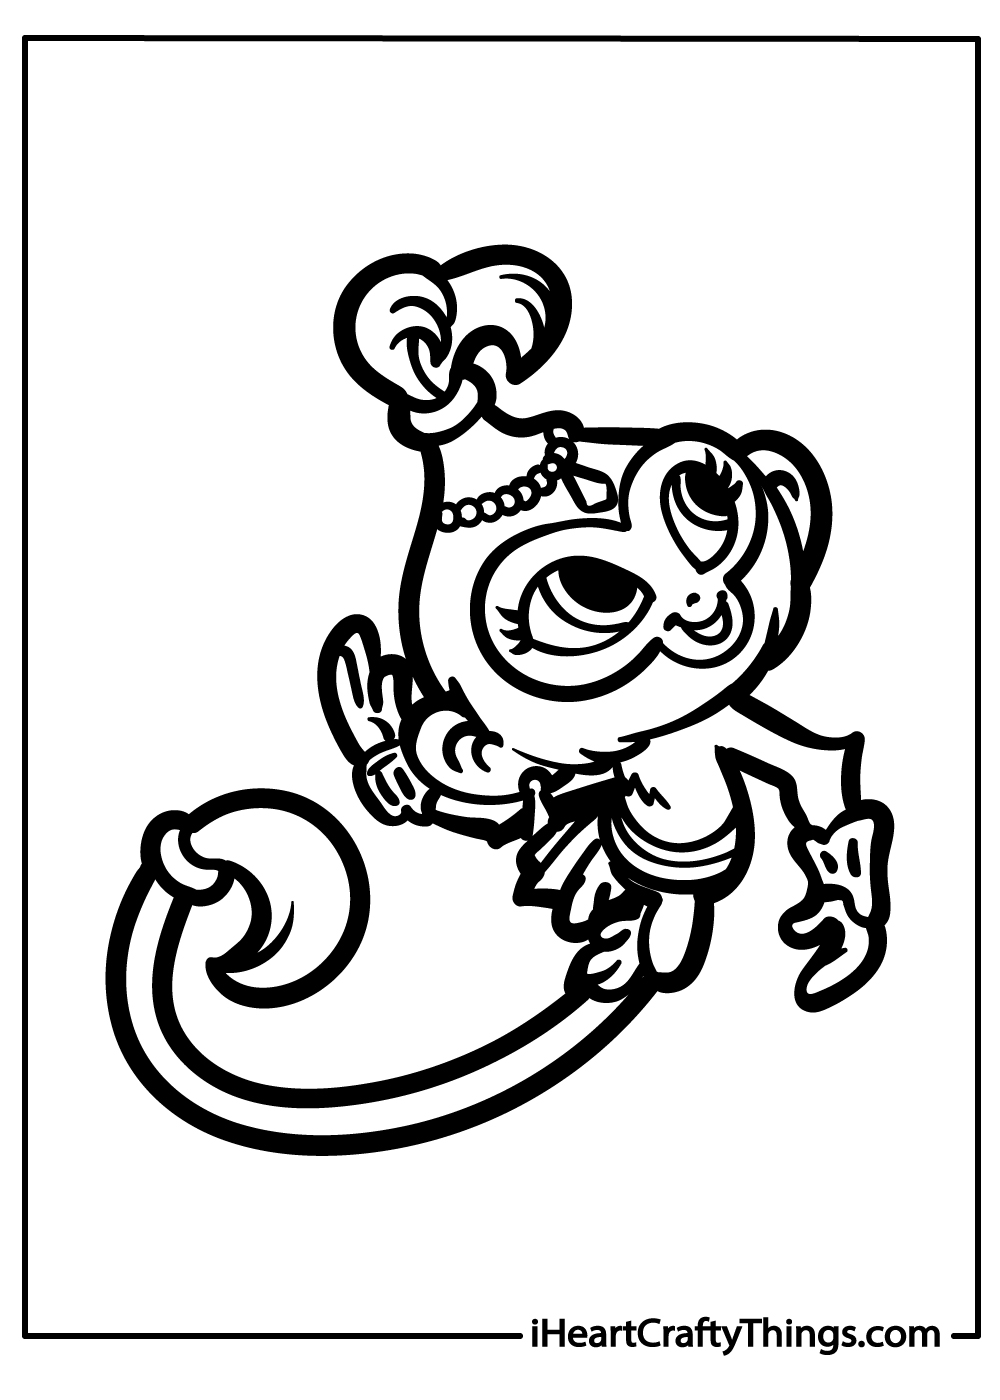 shimmer and shine coloring sheet free download